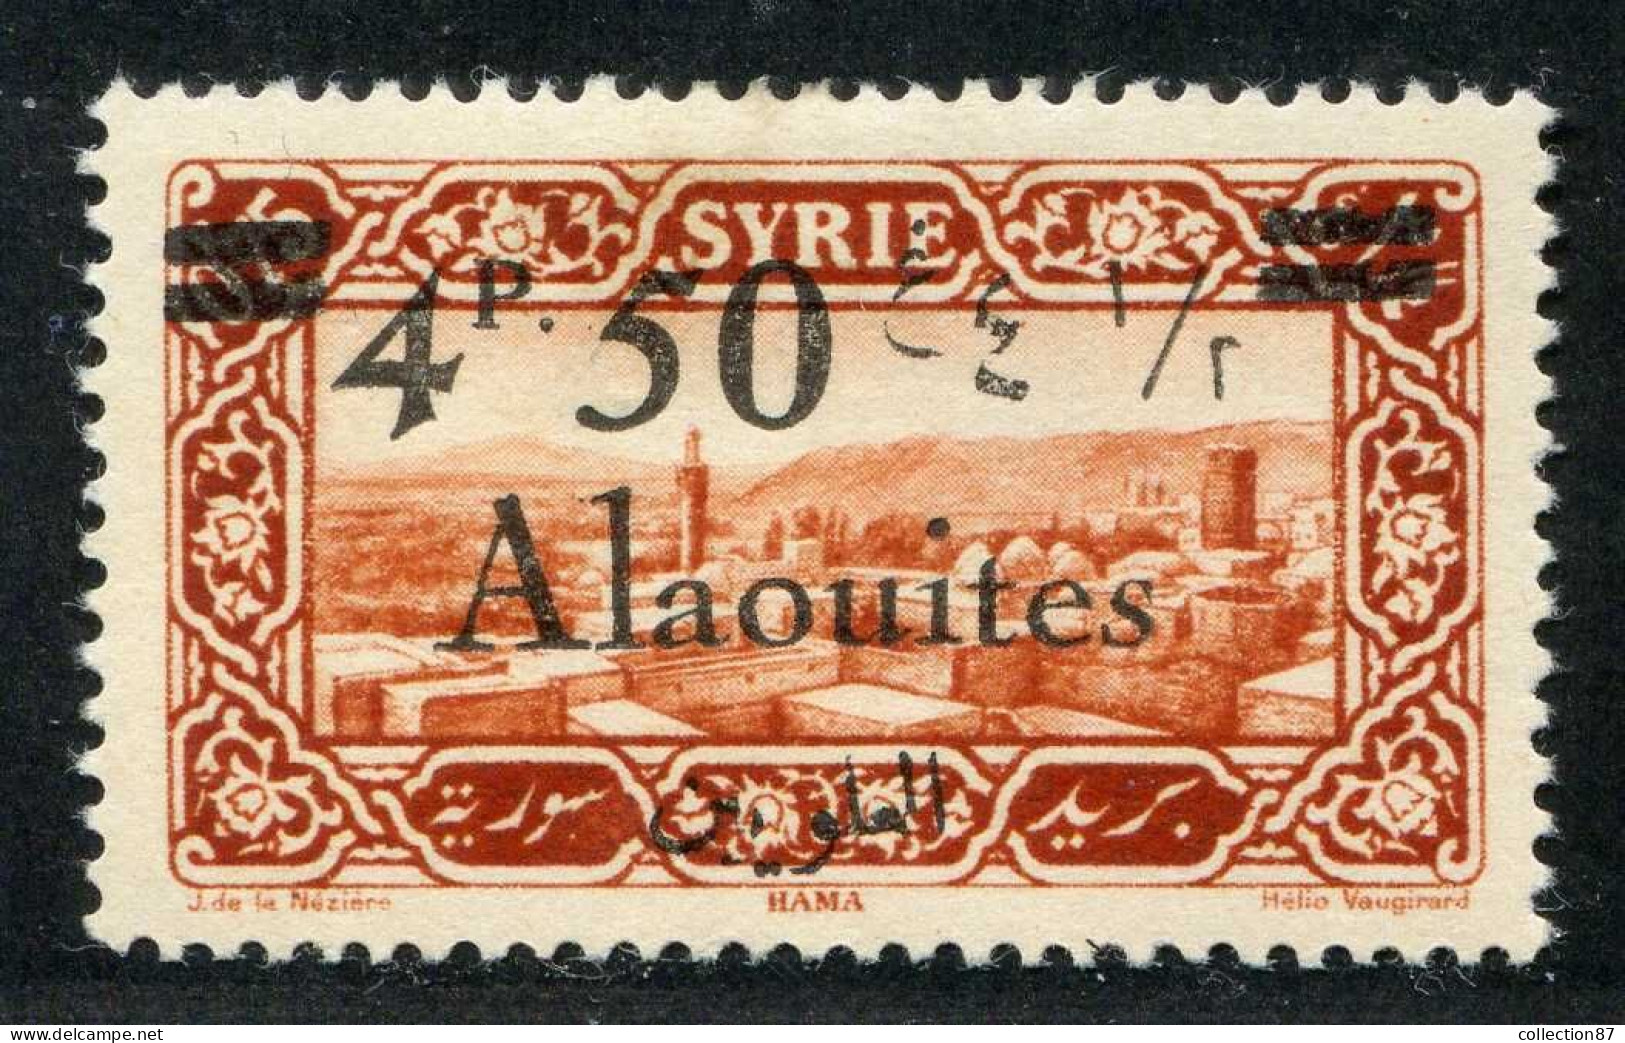 REF 089 > ALAOUITES < N° 44 * < Neuf Ch Dos Visible - MH * - Neufs